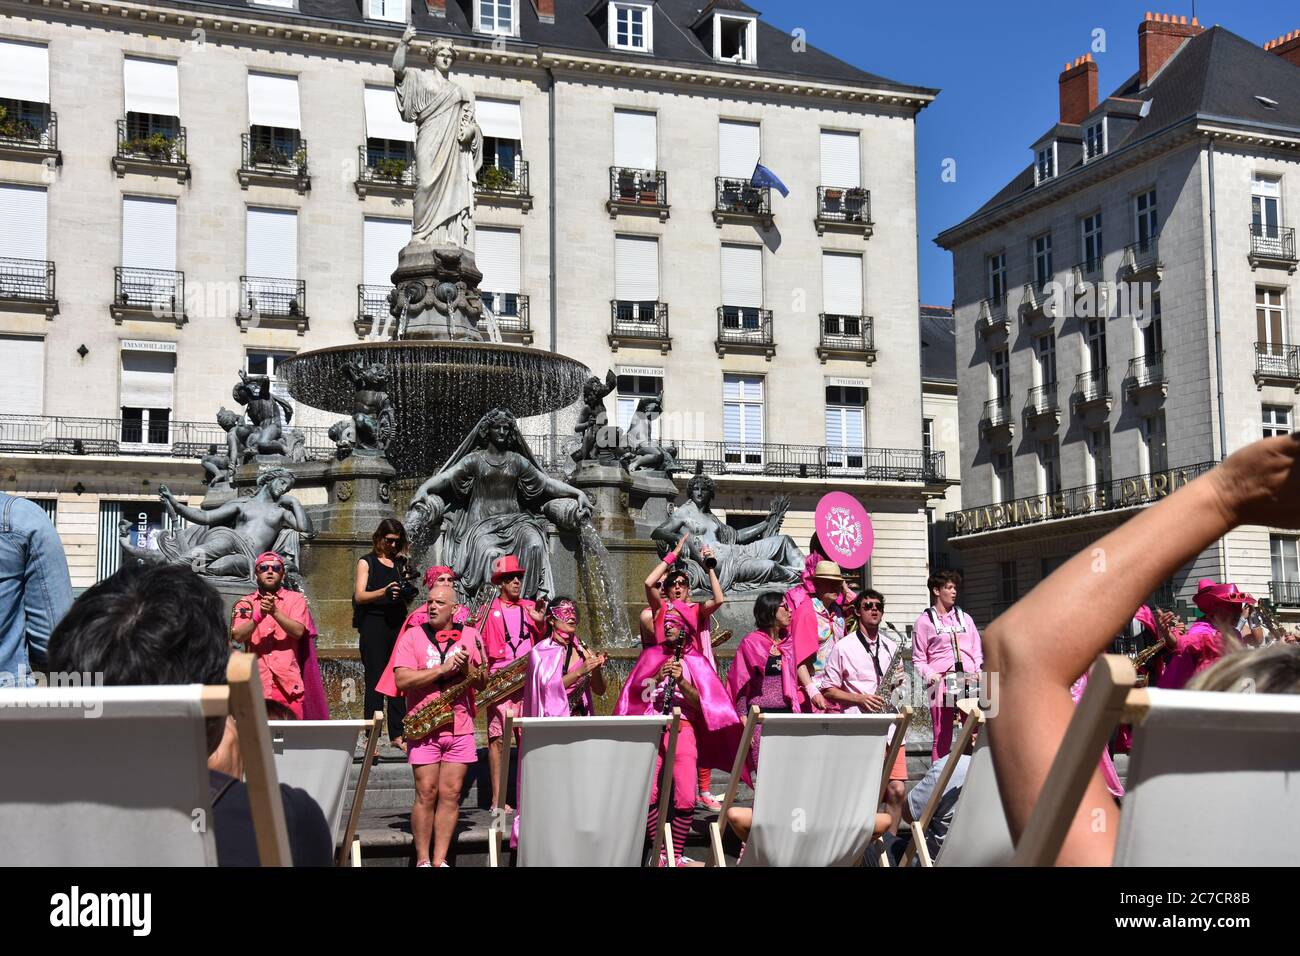 People playing instruments in the central square of Nantes, France Stock Photo